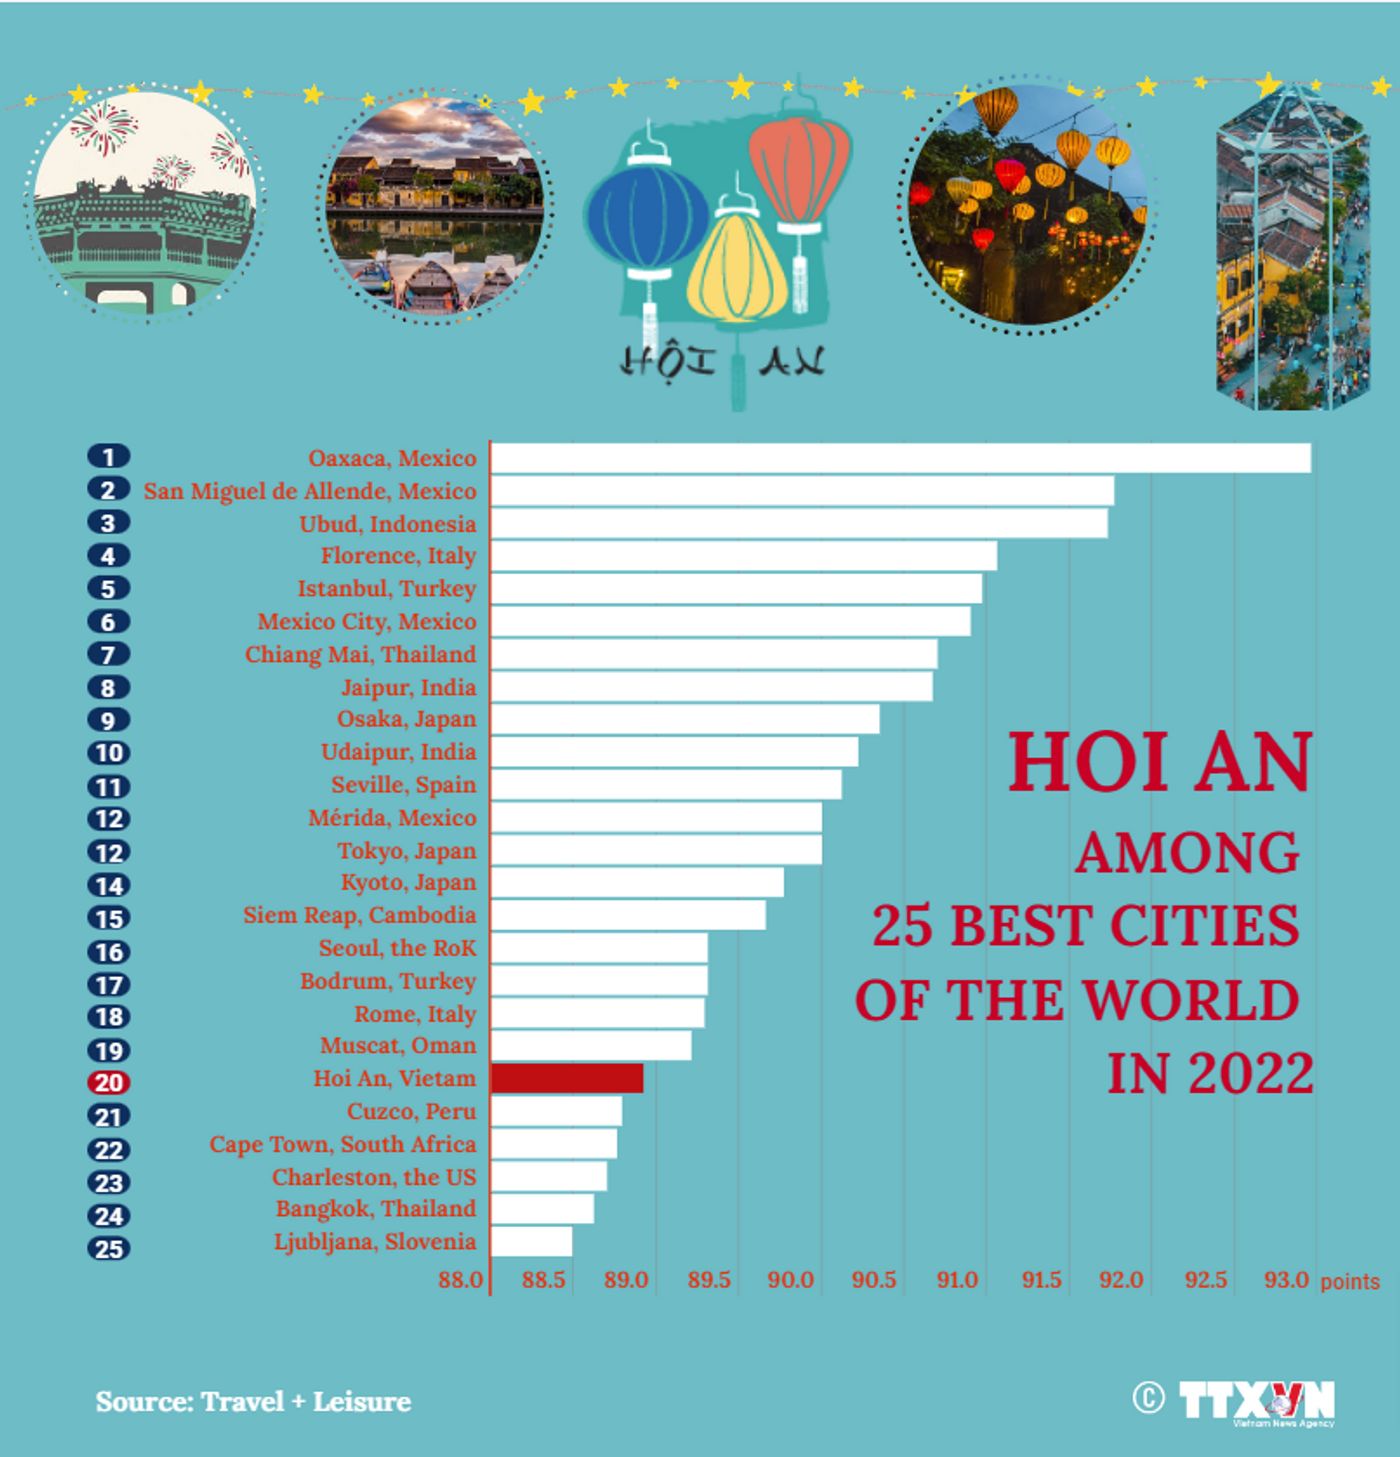 Hoi An among the 25 best cities in the world in 2022